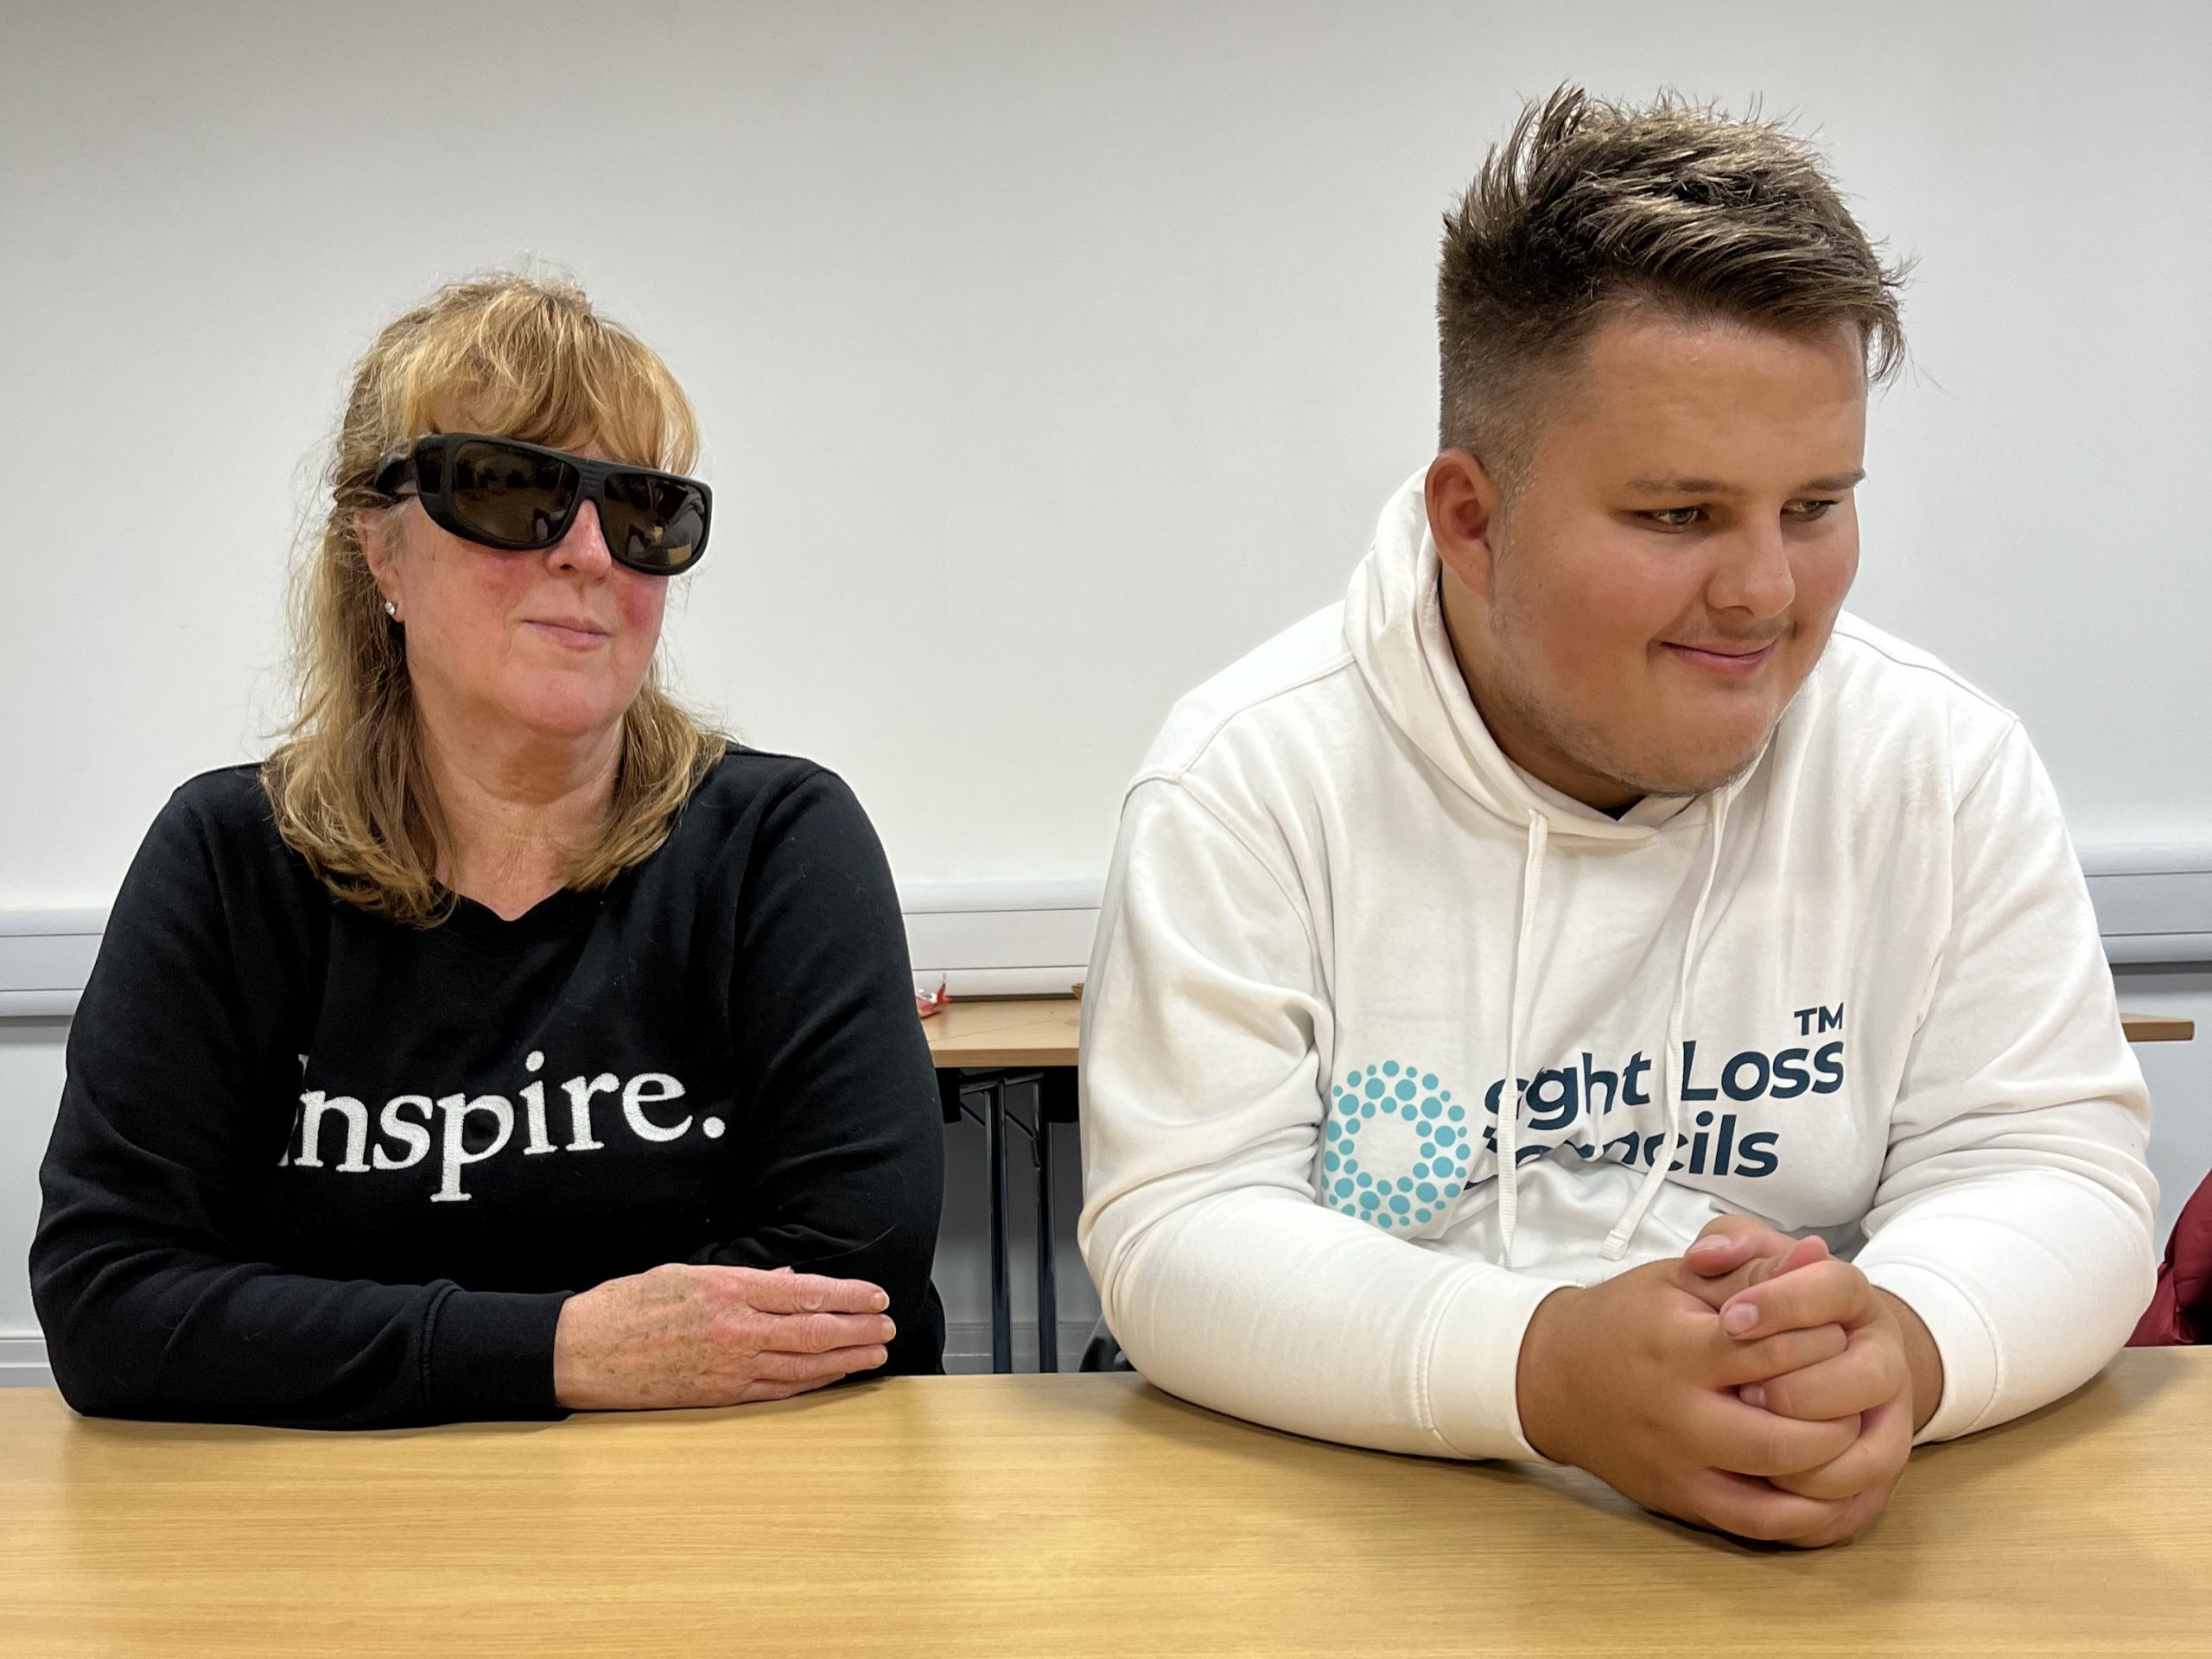 Lynne Rennison and Lloyd Sakr, pictured sitting next to each other during the launch meeting. Lynne is wearing sunglasses and looking at the camera smiling. Lloys is wearing his white SLC hoodies, and smiling whilst looking to the side.